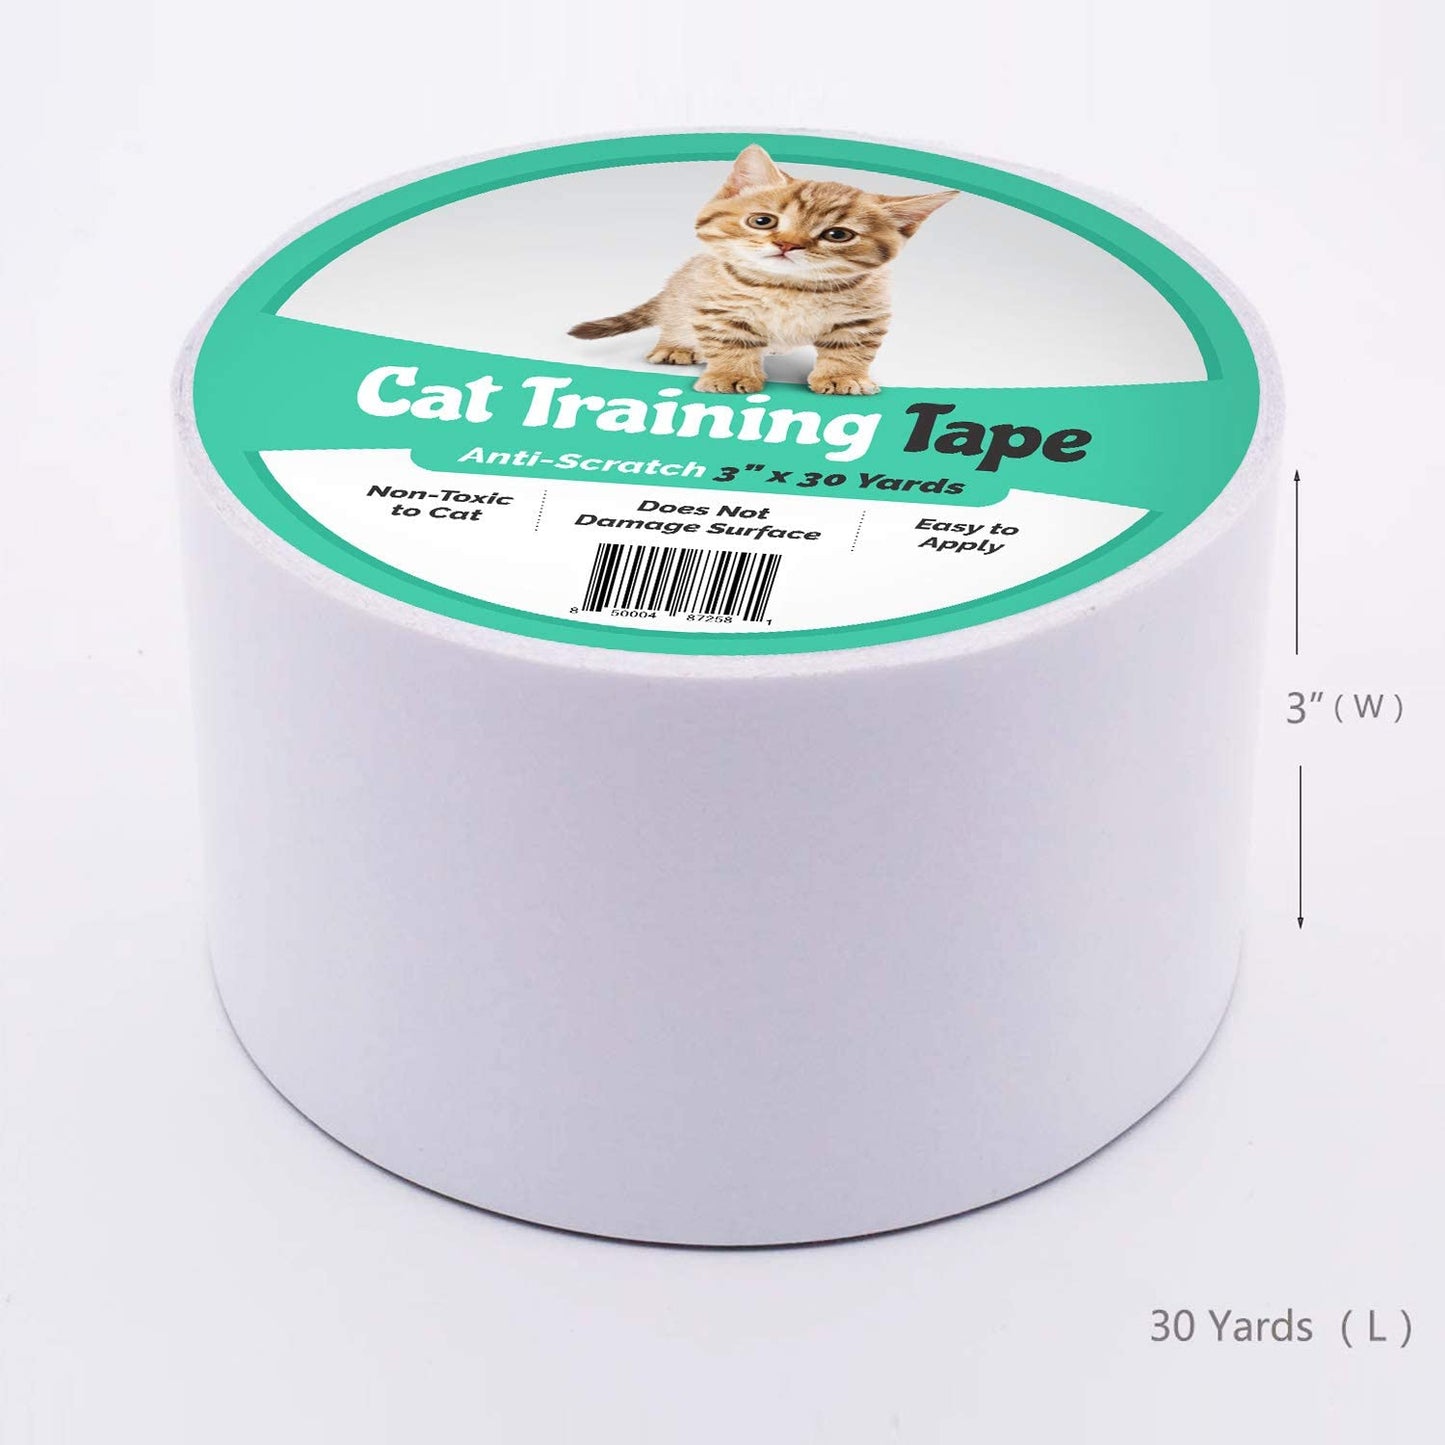 Anti-Scratch Cat Training Tape Provides Cat Scratch Prevention for Furniture, Carpet and More (3 Inches X 30 Yards)